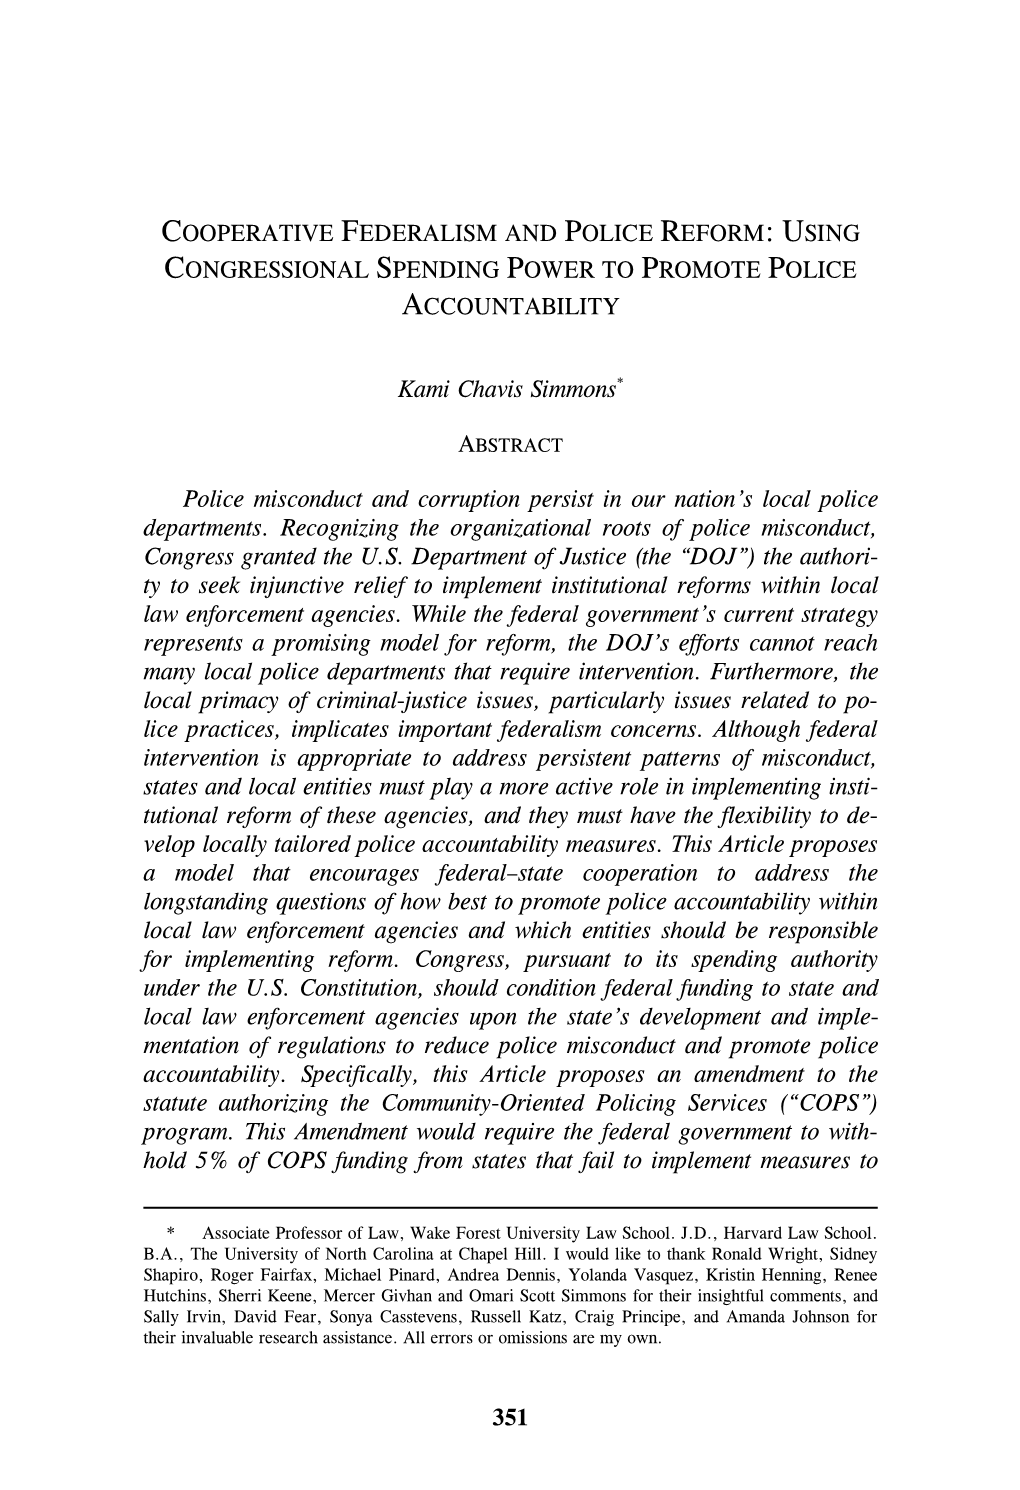 Cooperative Federalism and Police Reform: Using Congressional Spending Power to Promote Police Accountability